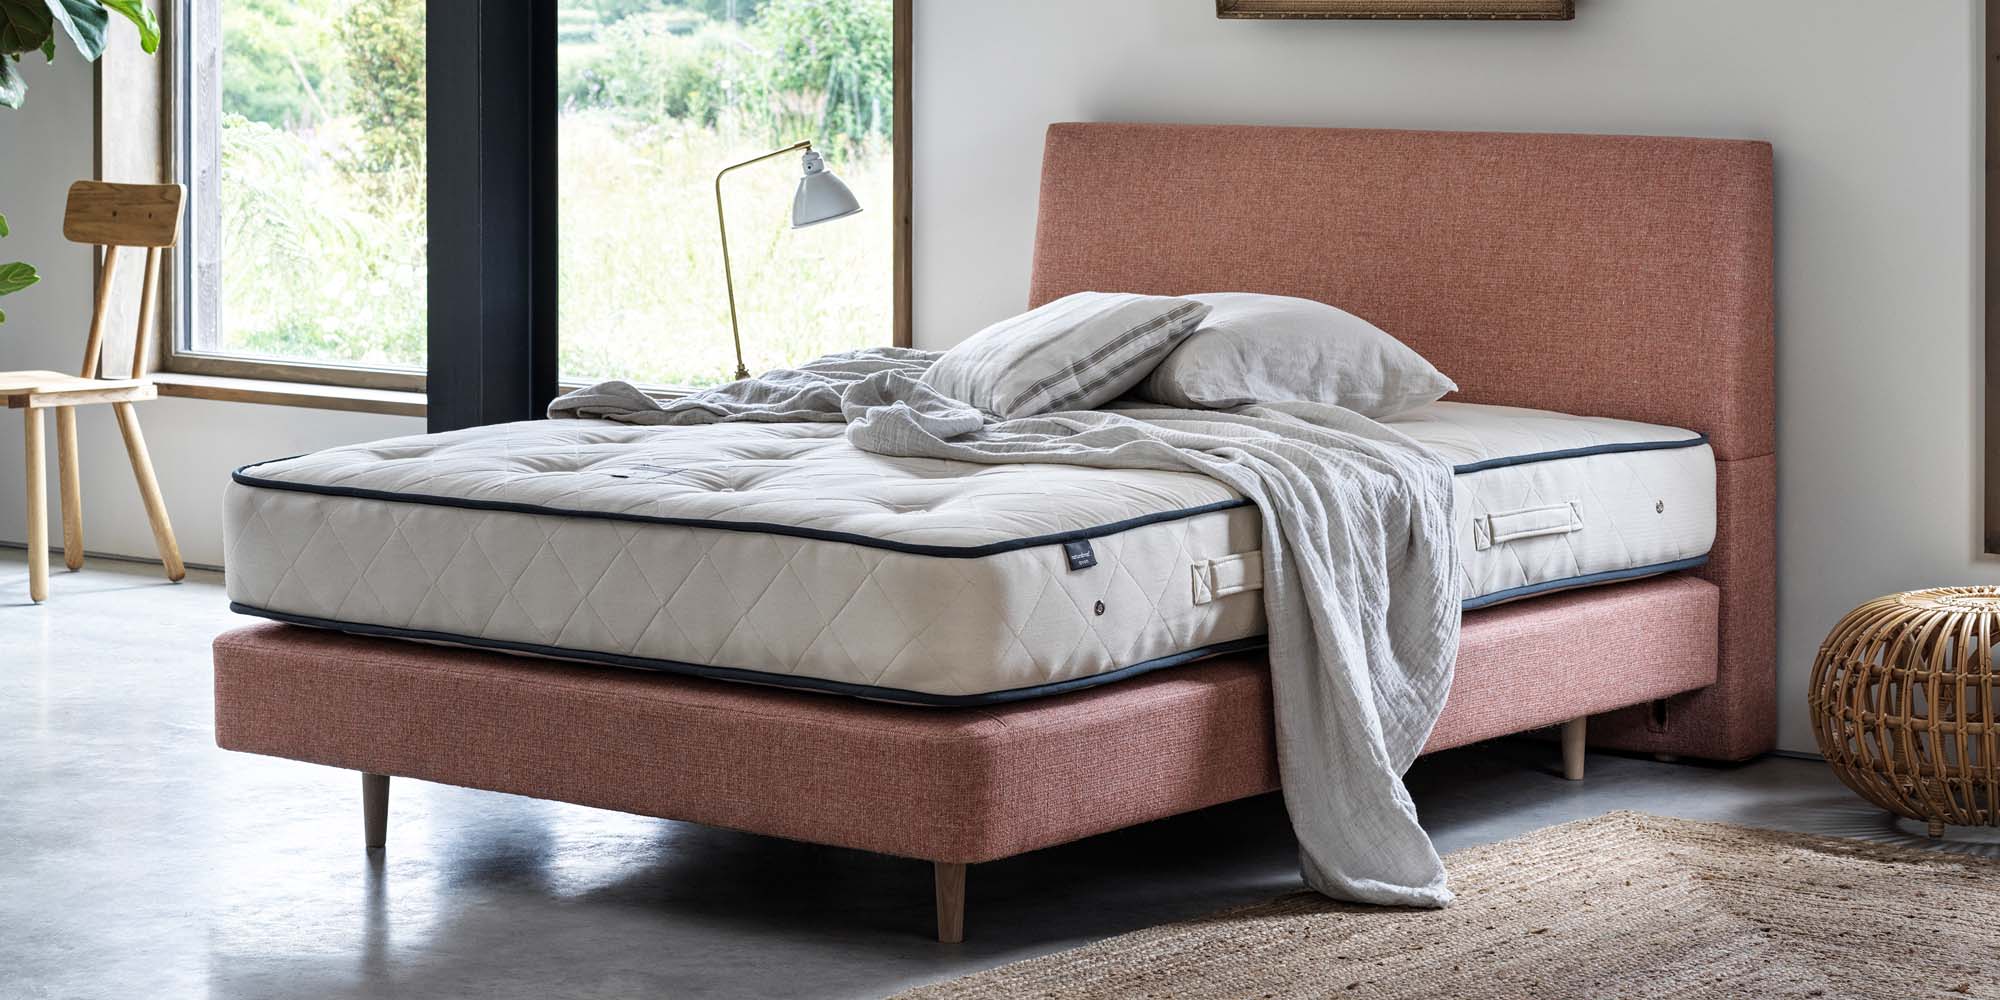 How to Choose a Mattress: Buying Guide